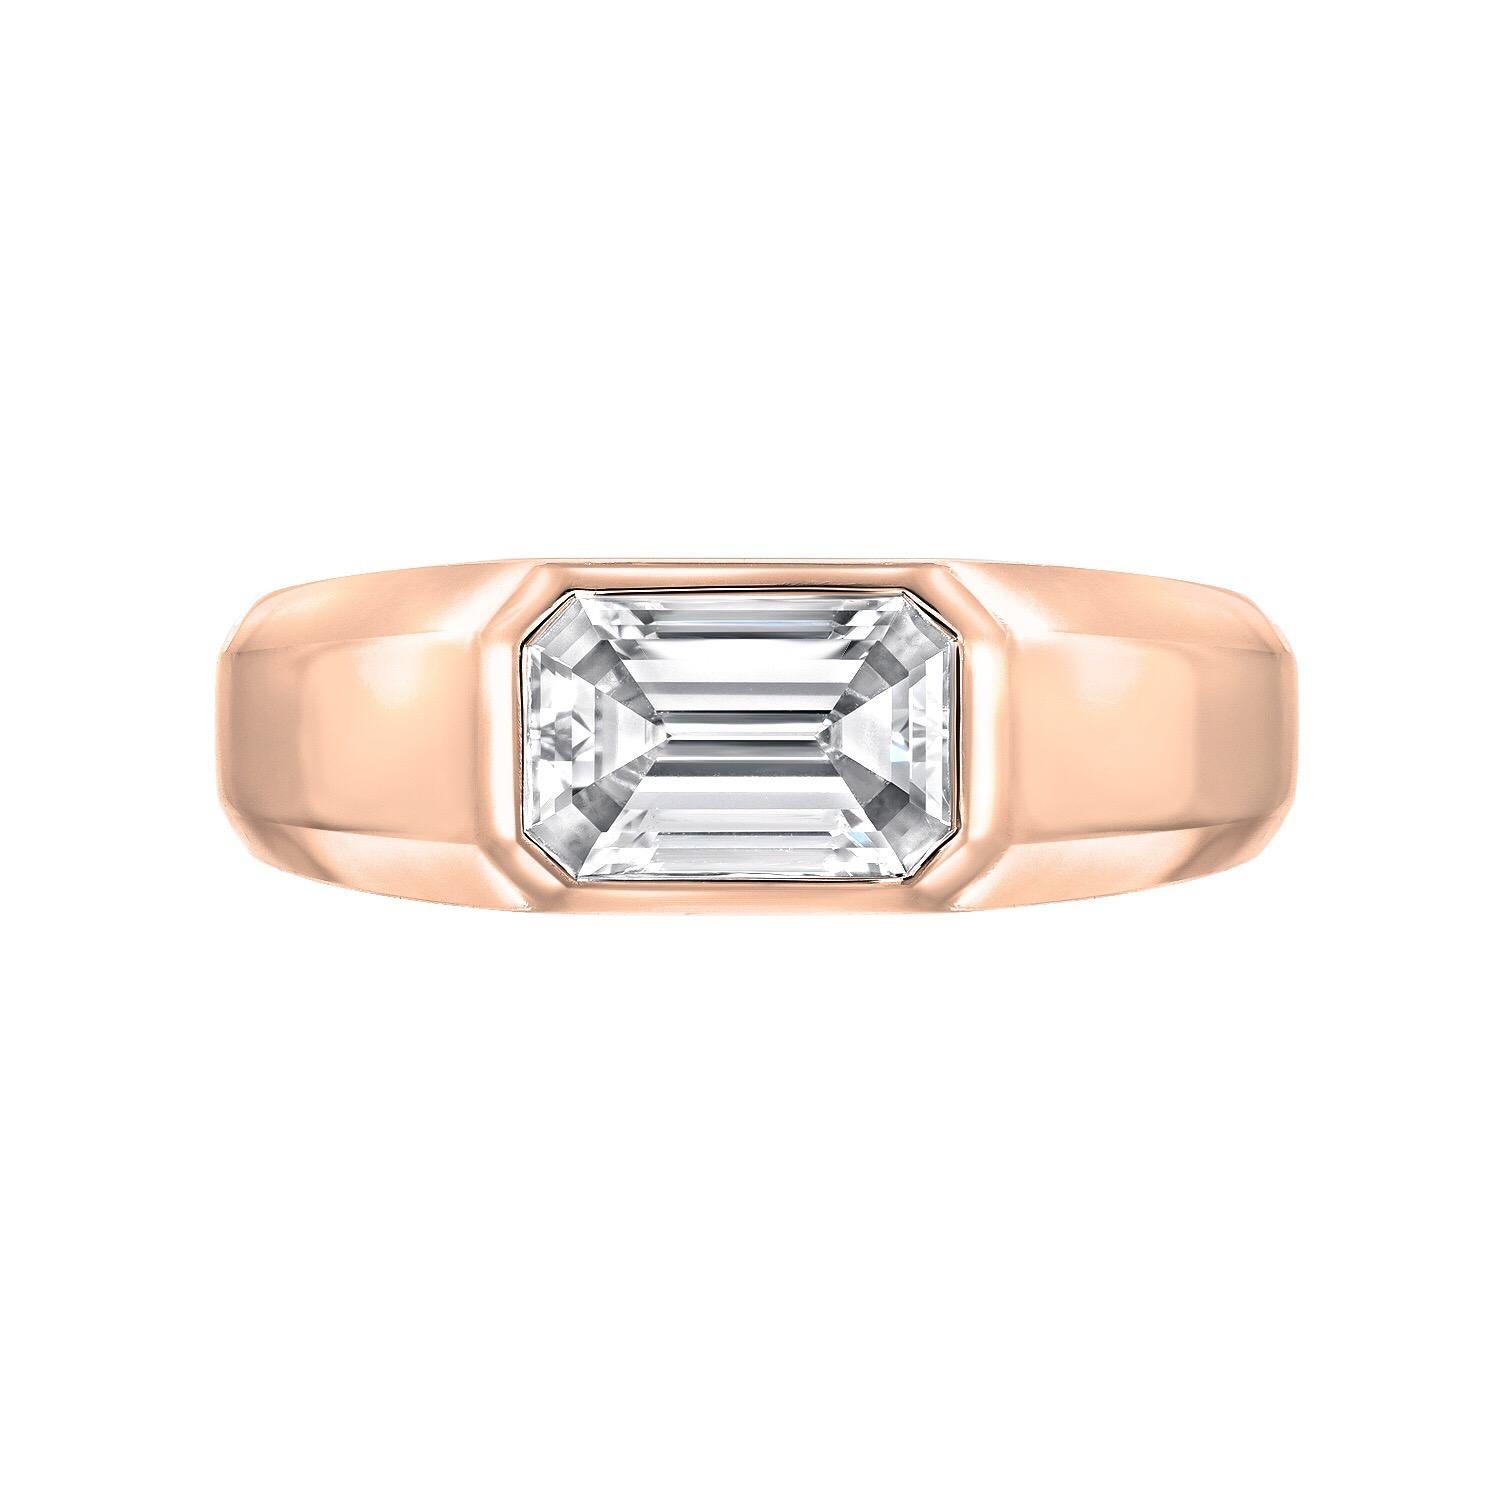 Emerald Cut diamond ring featuring a G.I.A certified 1.02 carat E color and VVS2 clarity emerald cut diamond, set in a pristine, hand crafted, 18K rose gold unisex ring. 
The G.I.A certificate is attached to the images for your convenience. 
Please